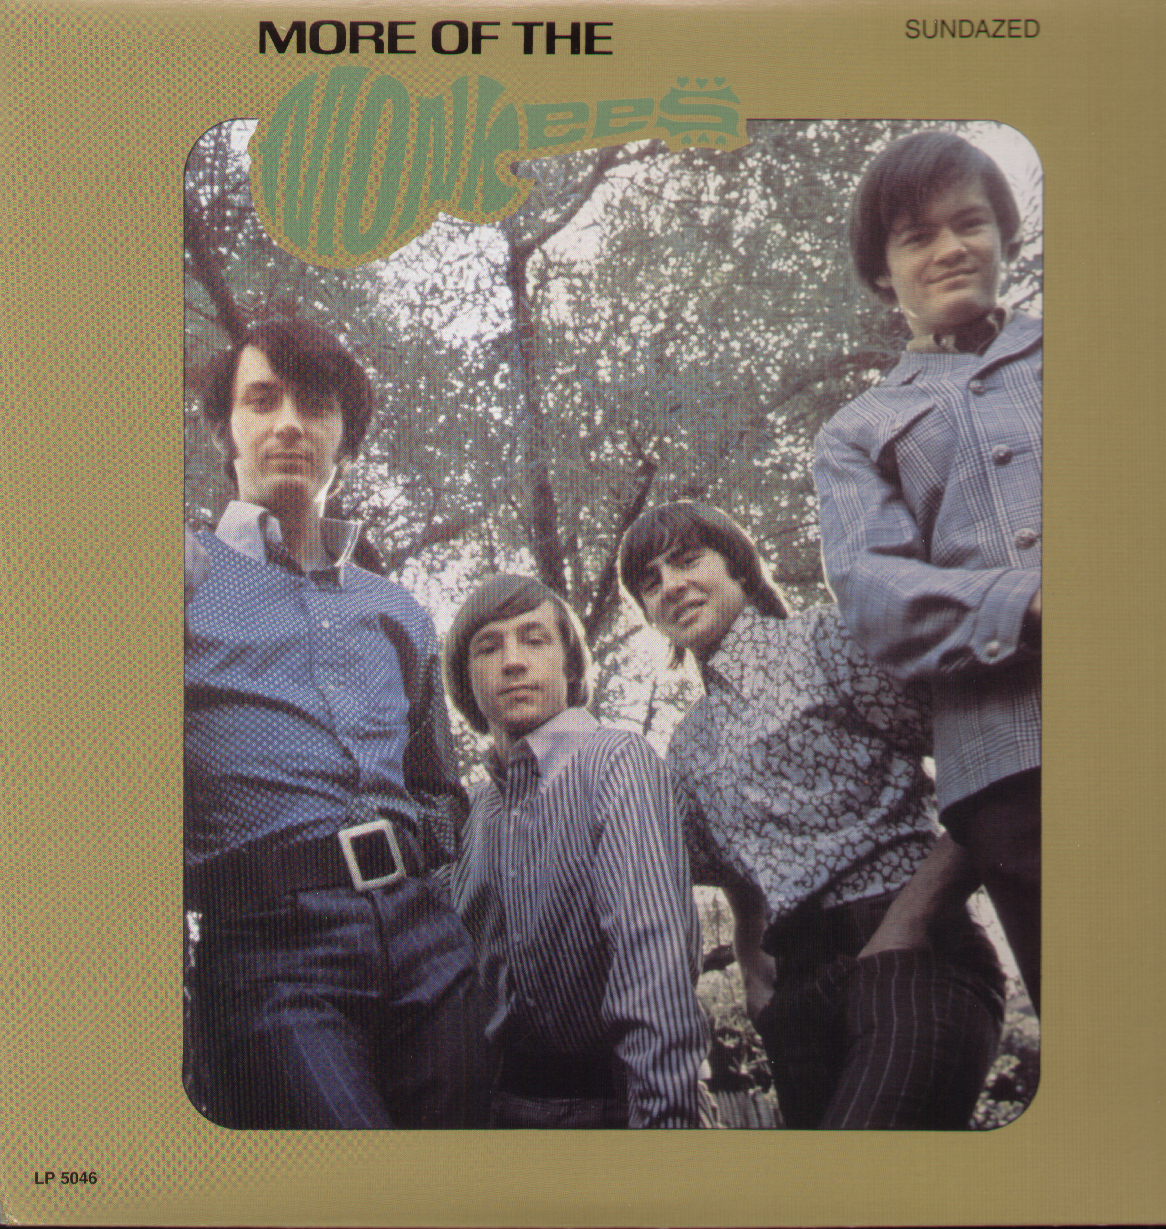 MORE OF THE MONKEES